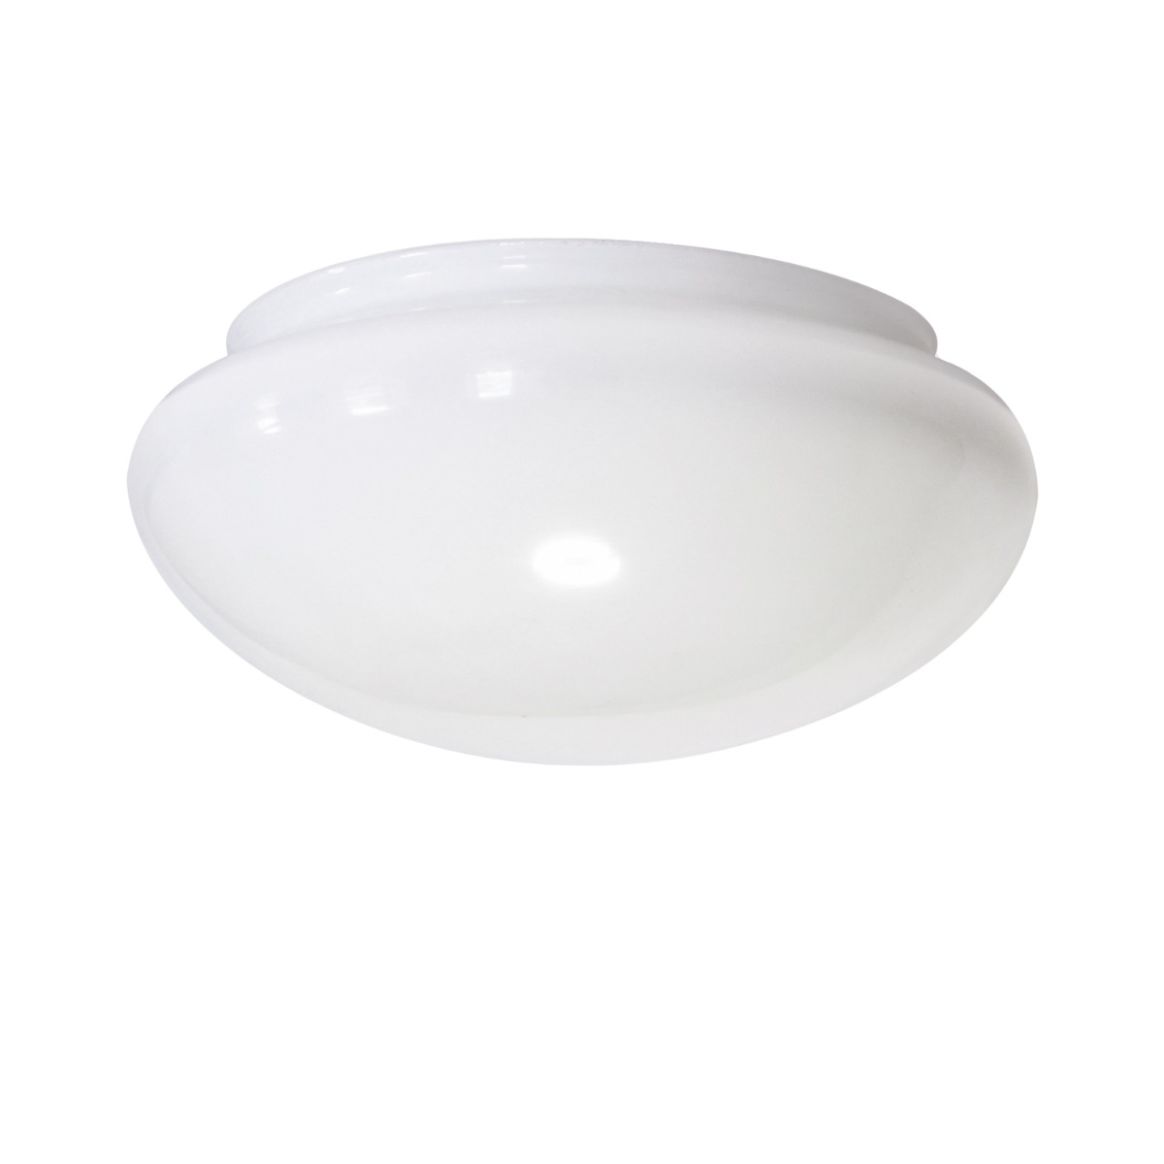 ceiling light replacement glass